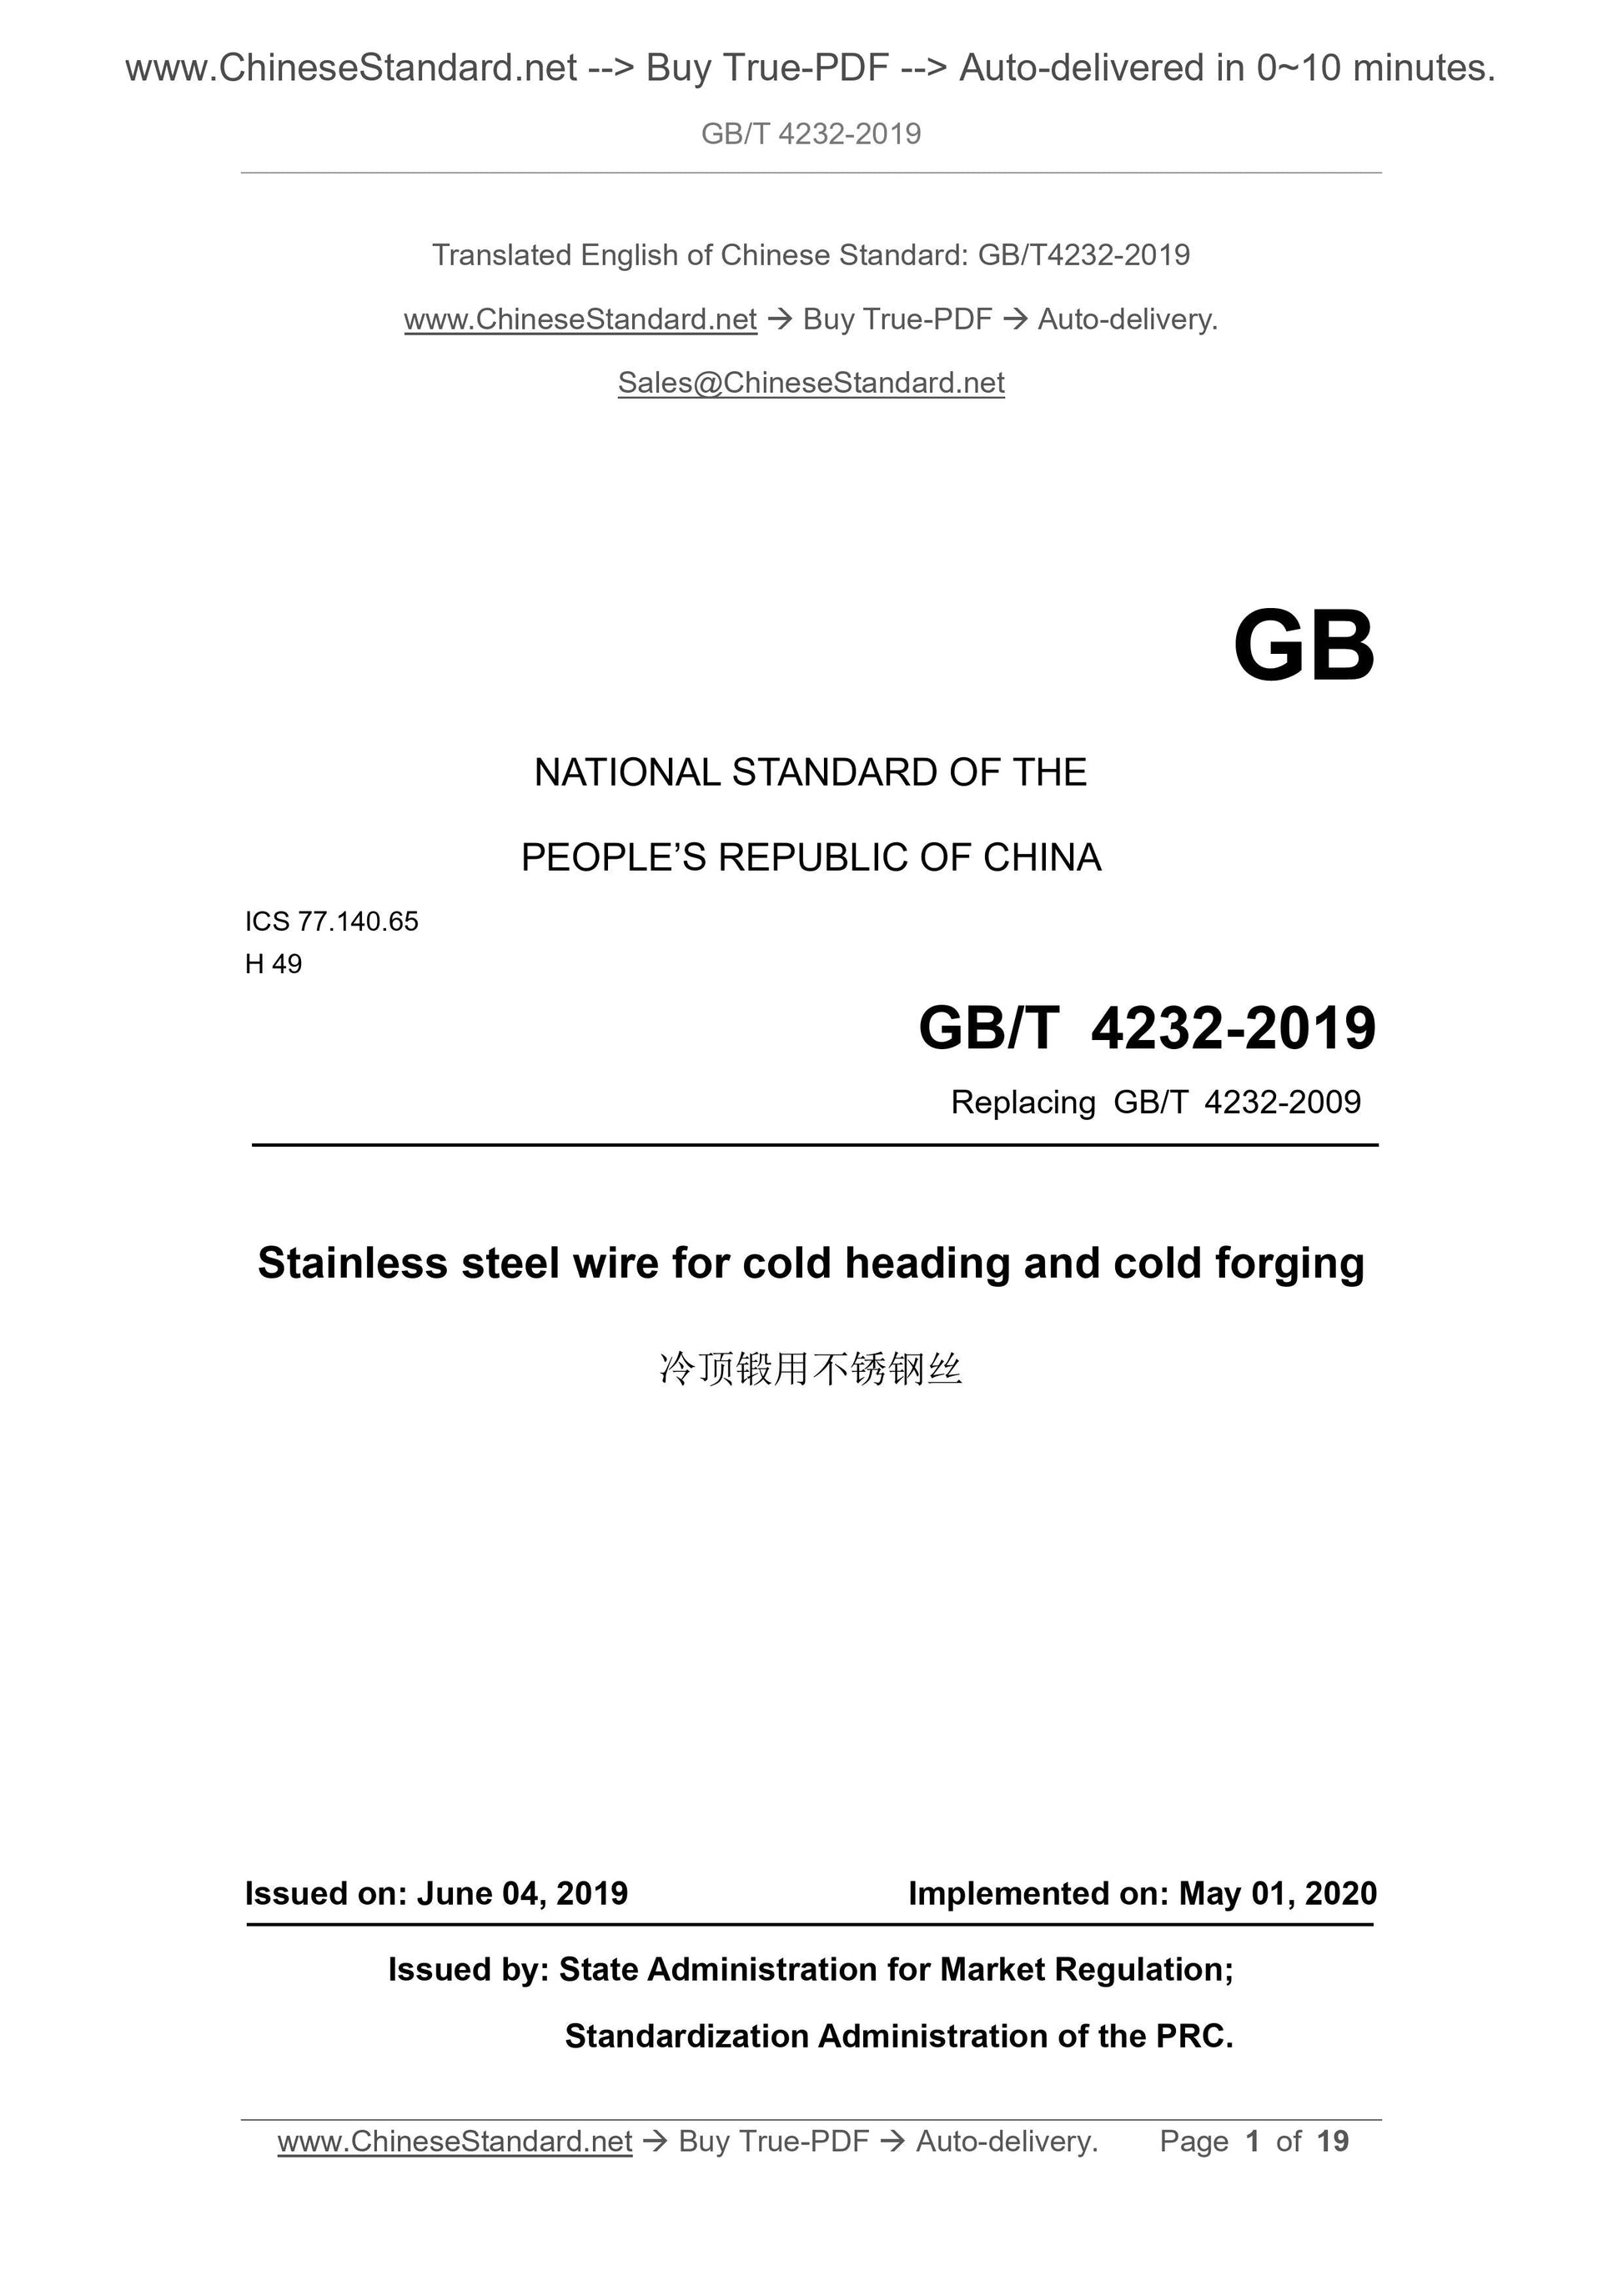 GB/T 4232-2019 Page 1